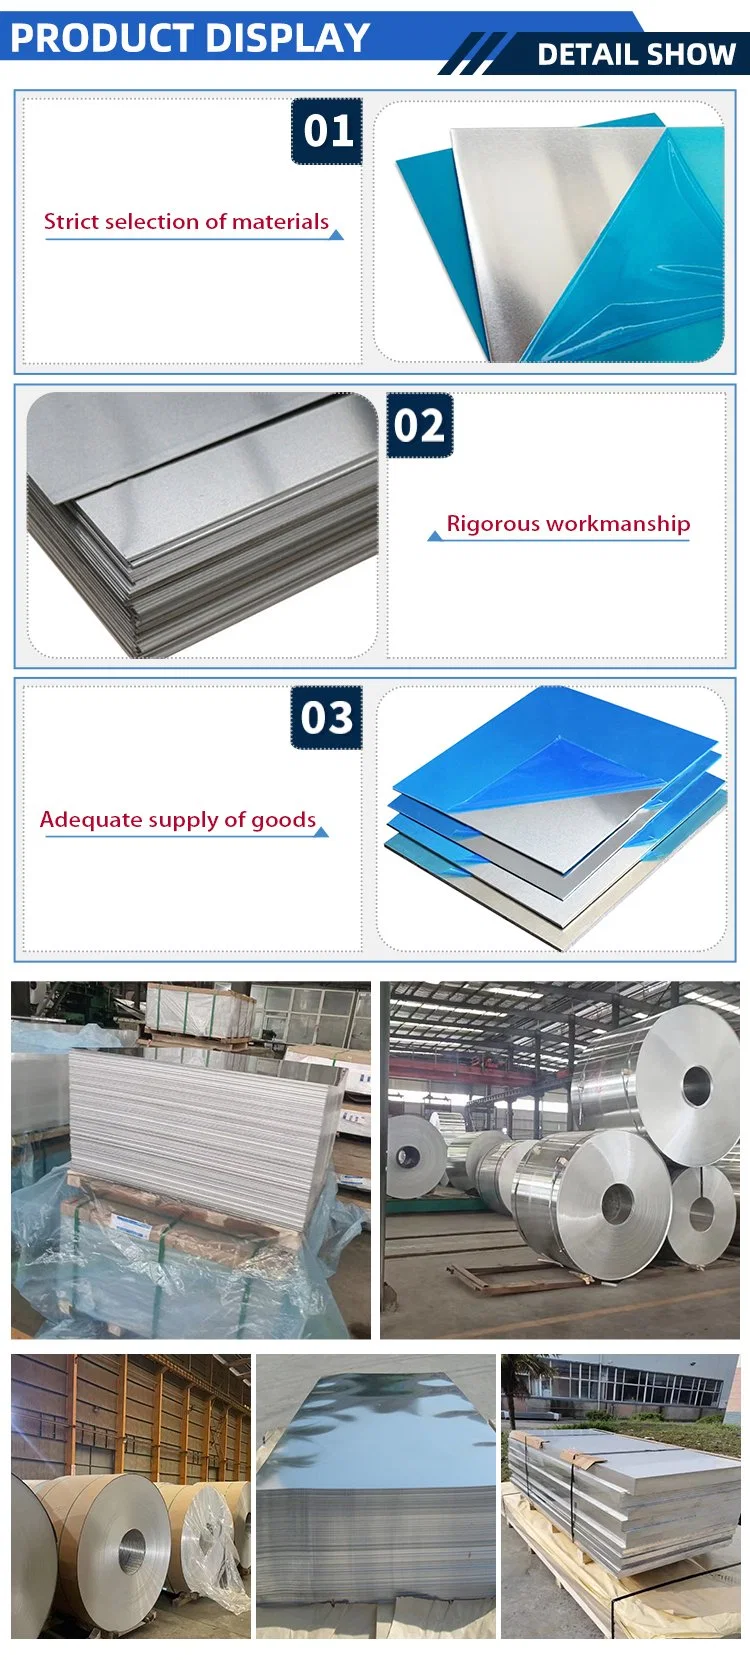 Sublimation Color Coated Metal Painted Al Aluminum Flat Sheet ISO9001 ASTM Silver Finished Rolled Al Alloy 6mm 2mm T651 6061 5083 3003 1100 1060 H14 T3 T8